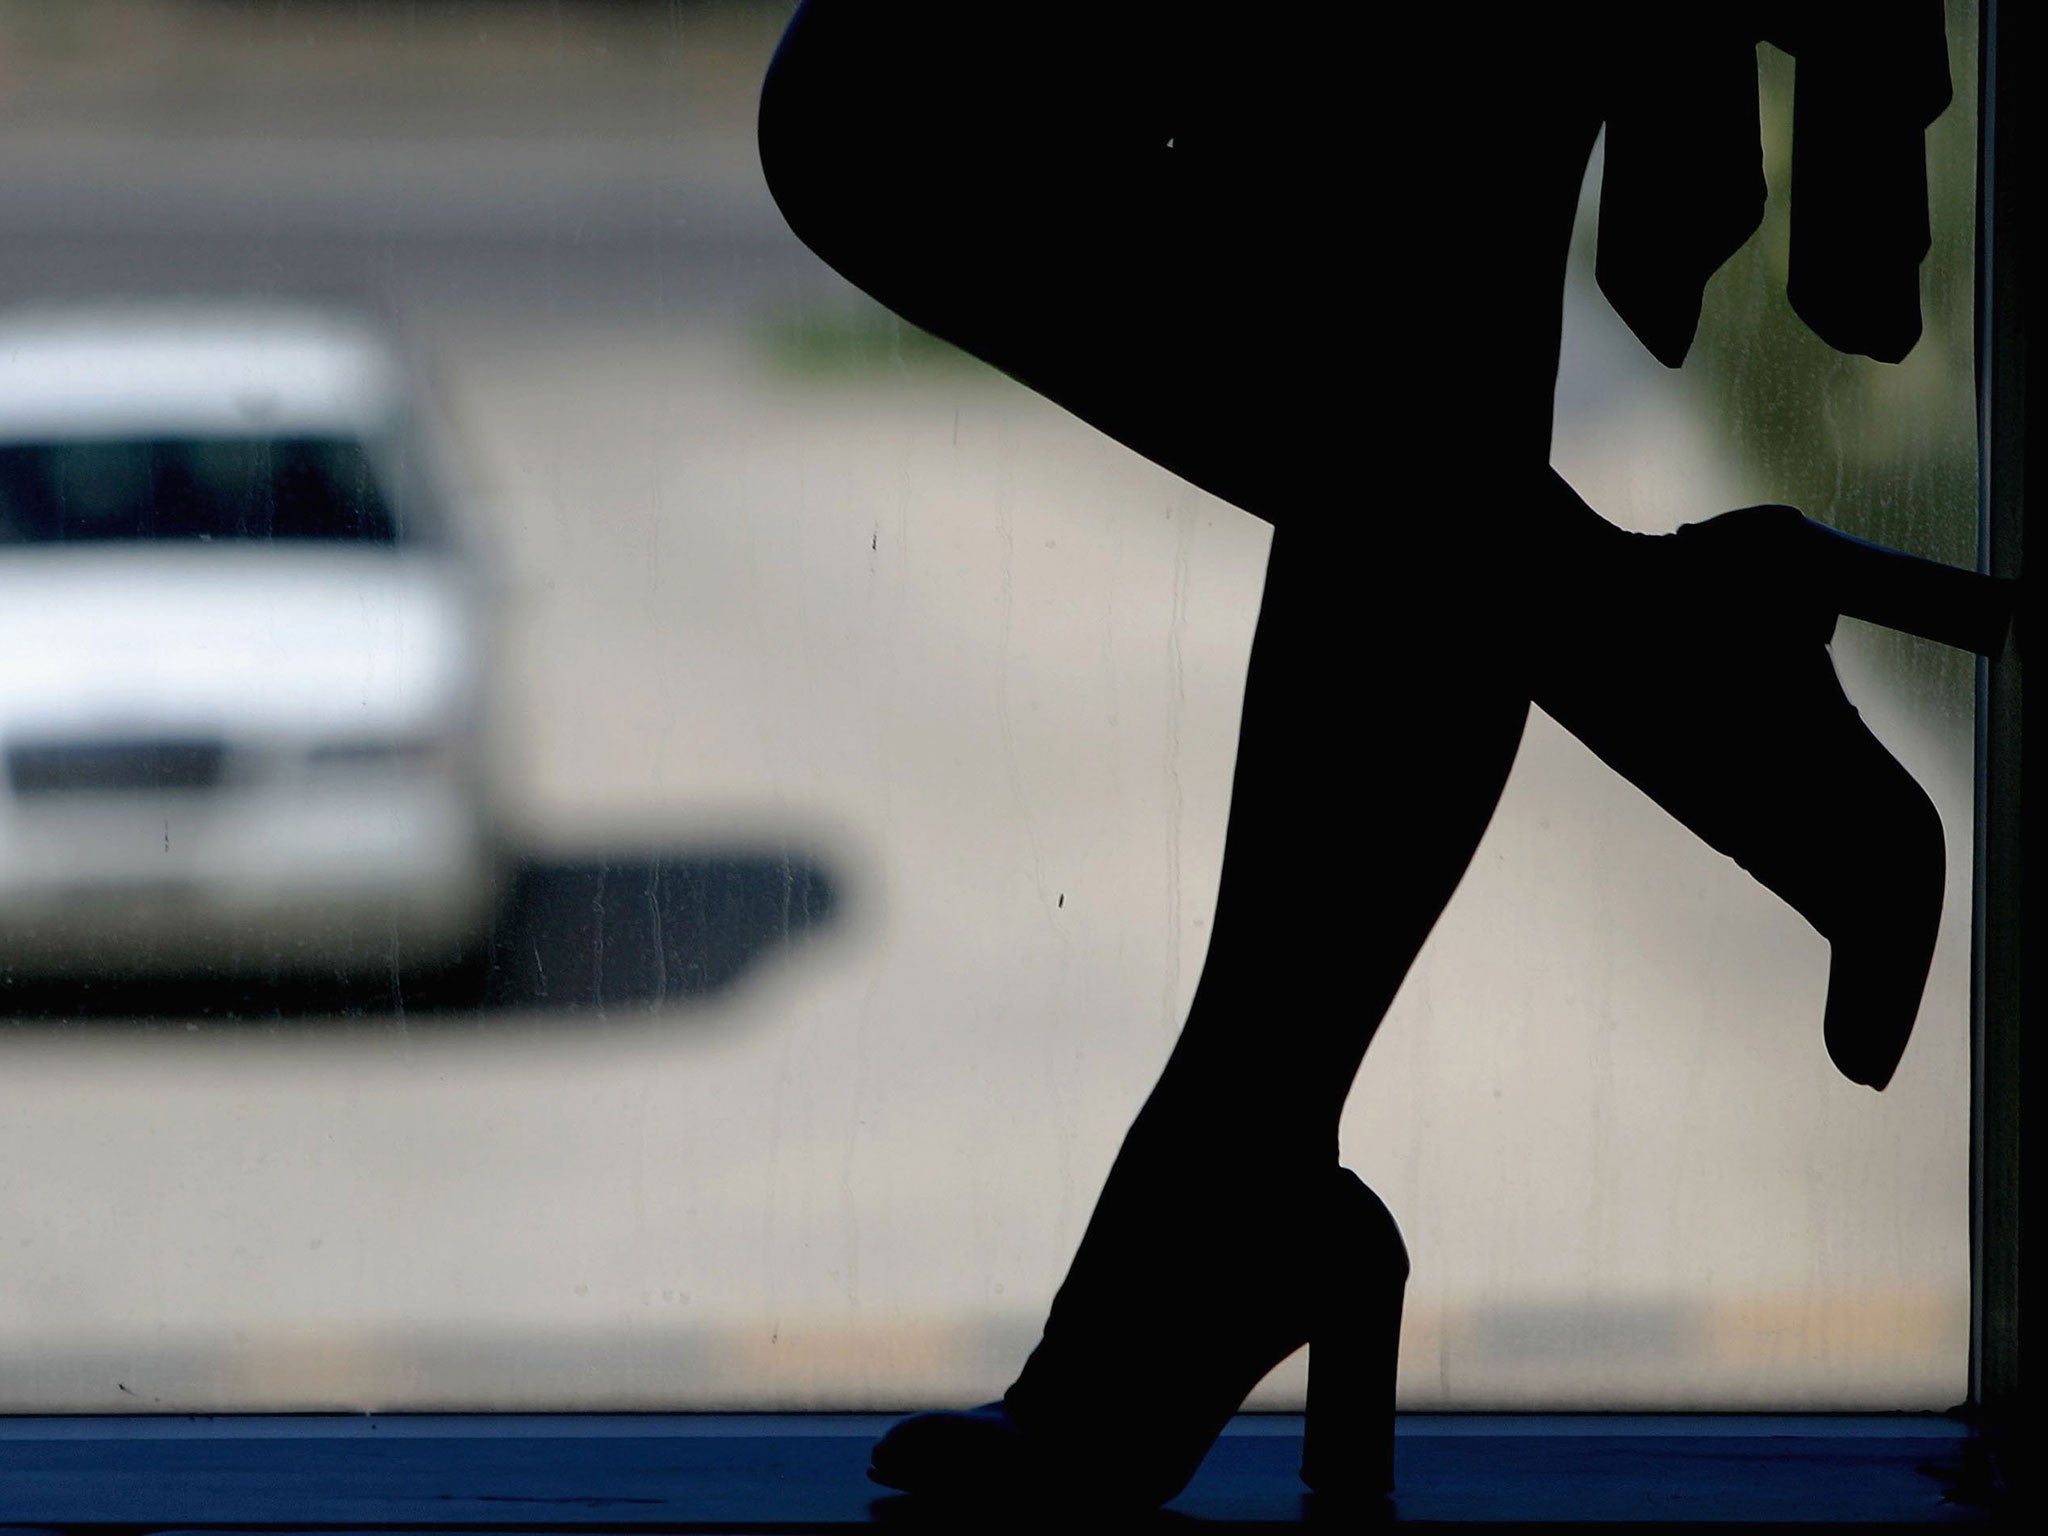 Scottish Labour wants to decriminalise prostitution, but make paying for sex illegal